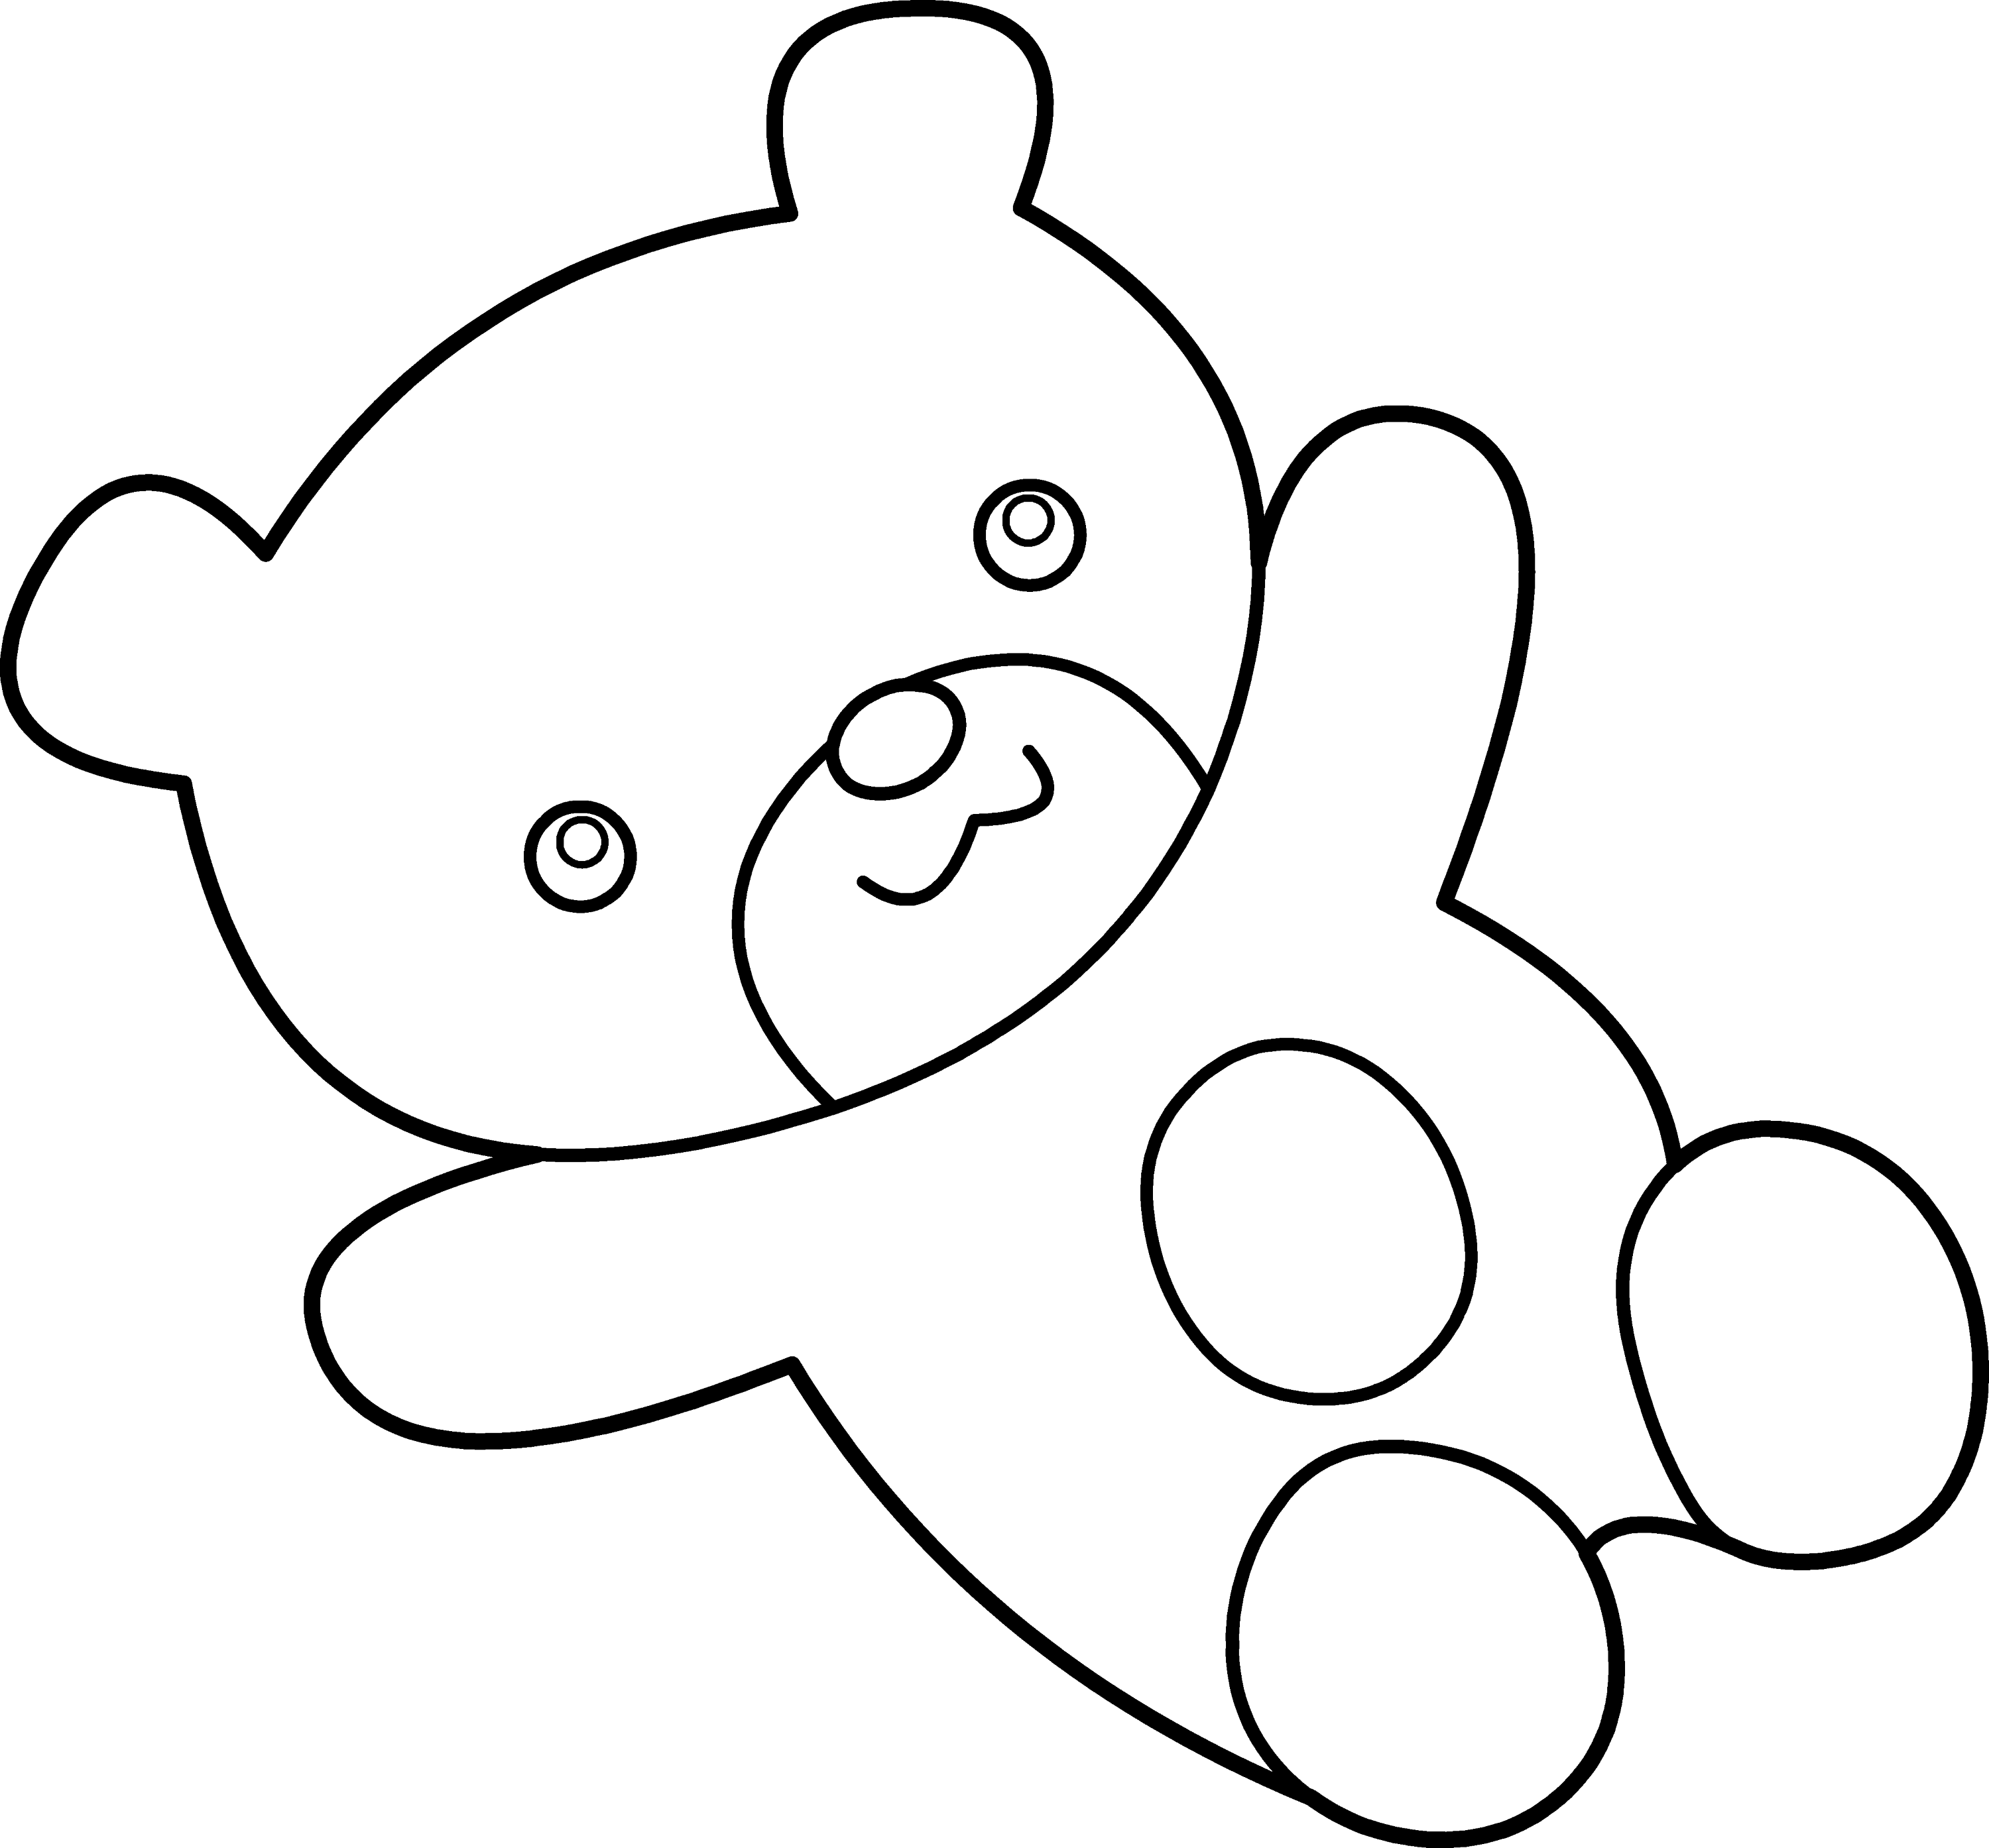 Cuddly Teddy Bear Coloring Page - Free Clip Art